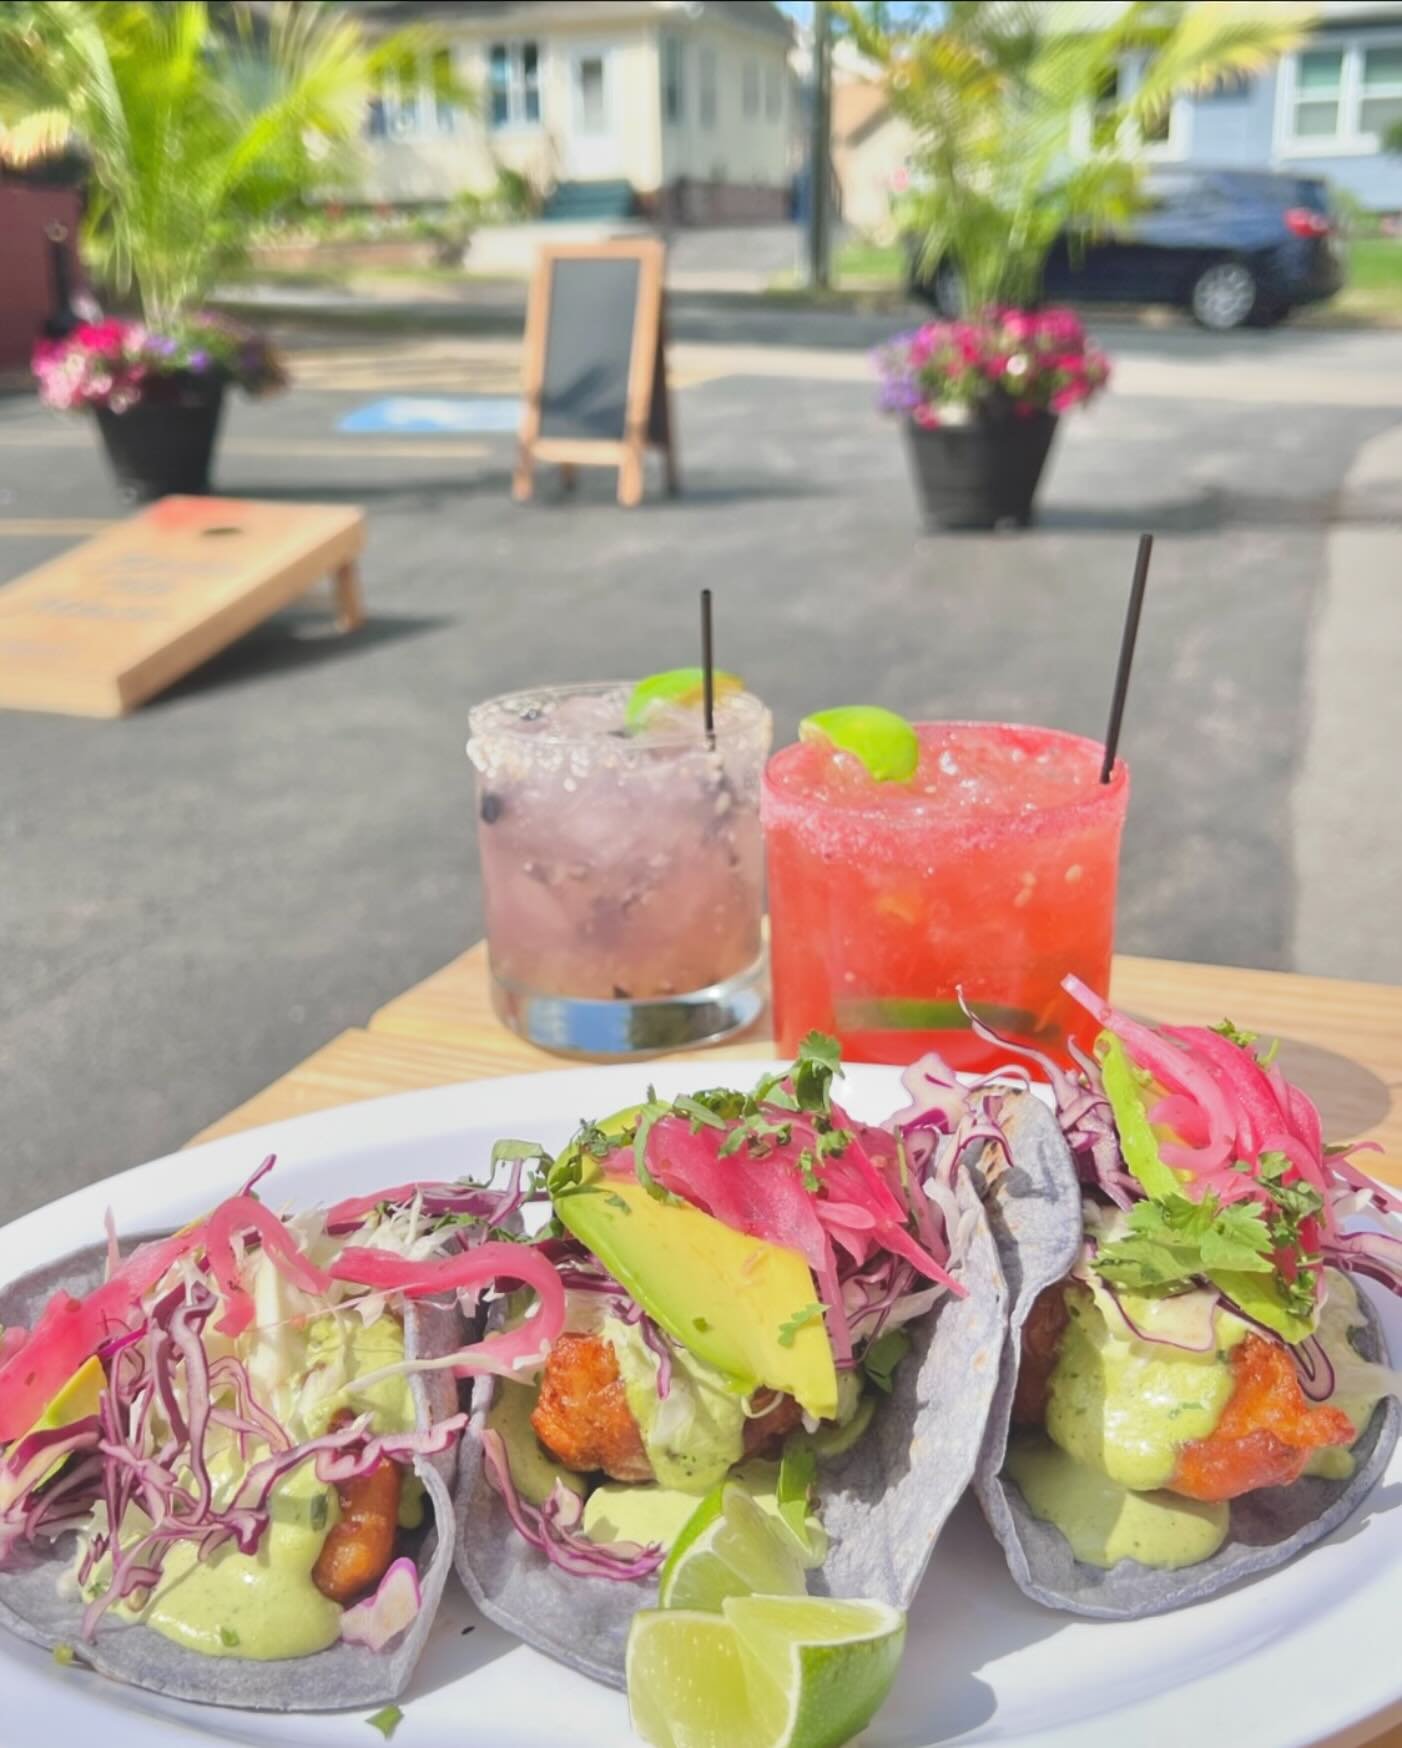 The sun is shining, the air is warm, and our PATIO IS OPEN!!! We&rsquo;re thrilled to welcome you back to our revamped patio seating area. With more tables, more fun, and more Tavos magic! Swing by for lunch and bask in the sun while savoring your fa